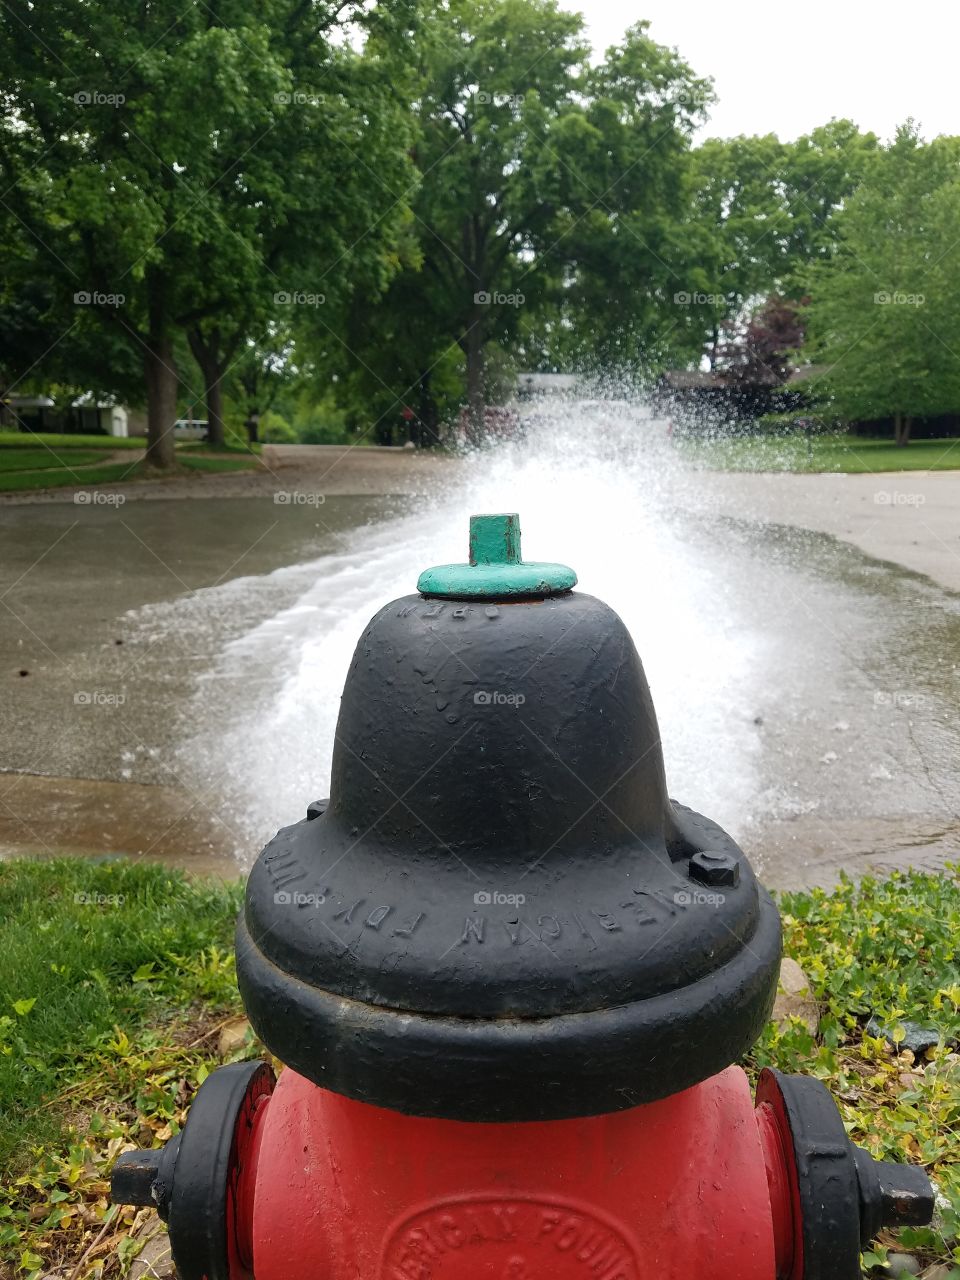 black bell top fire hydrant sprays water on a sumer day